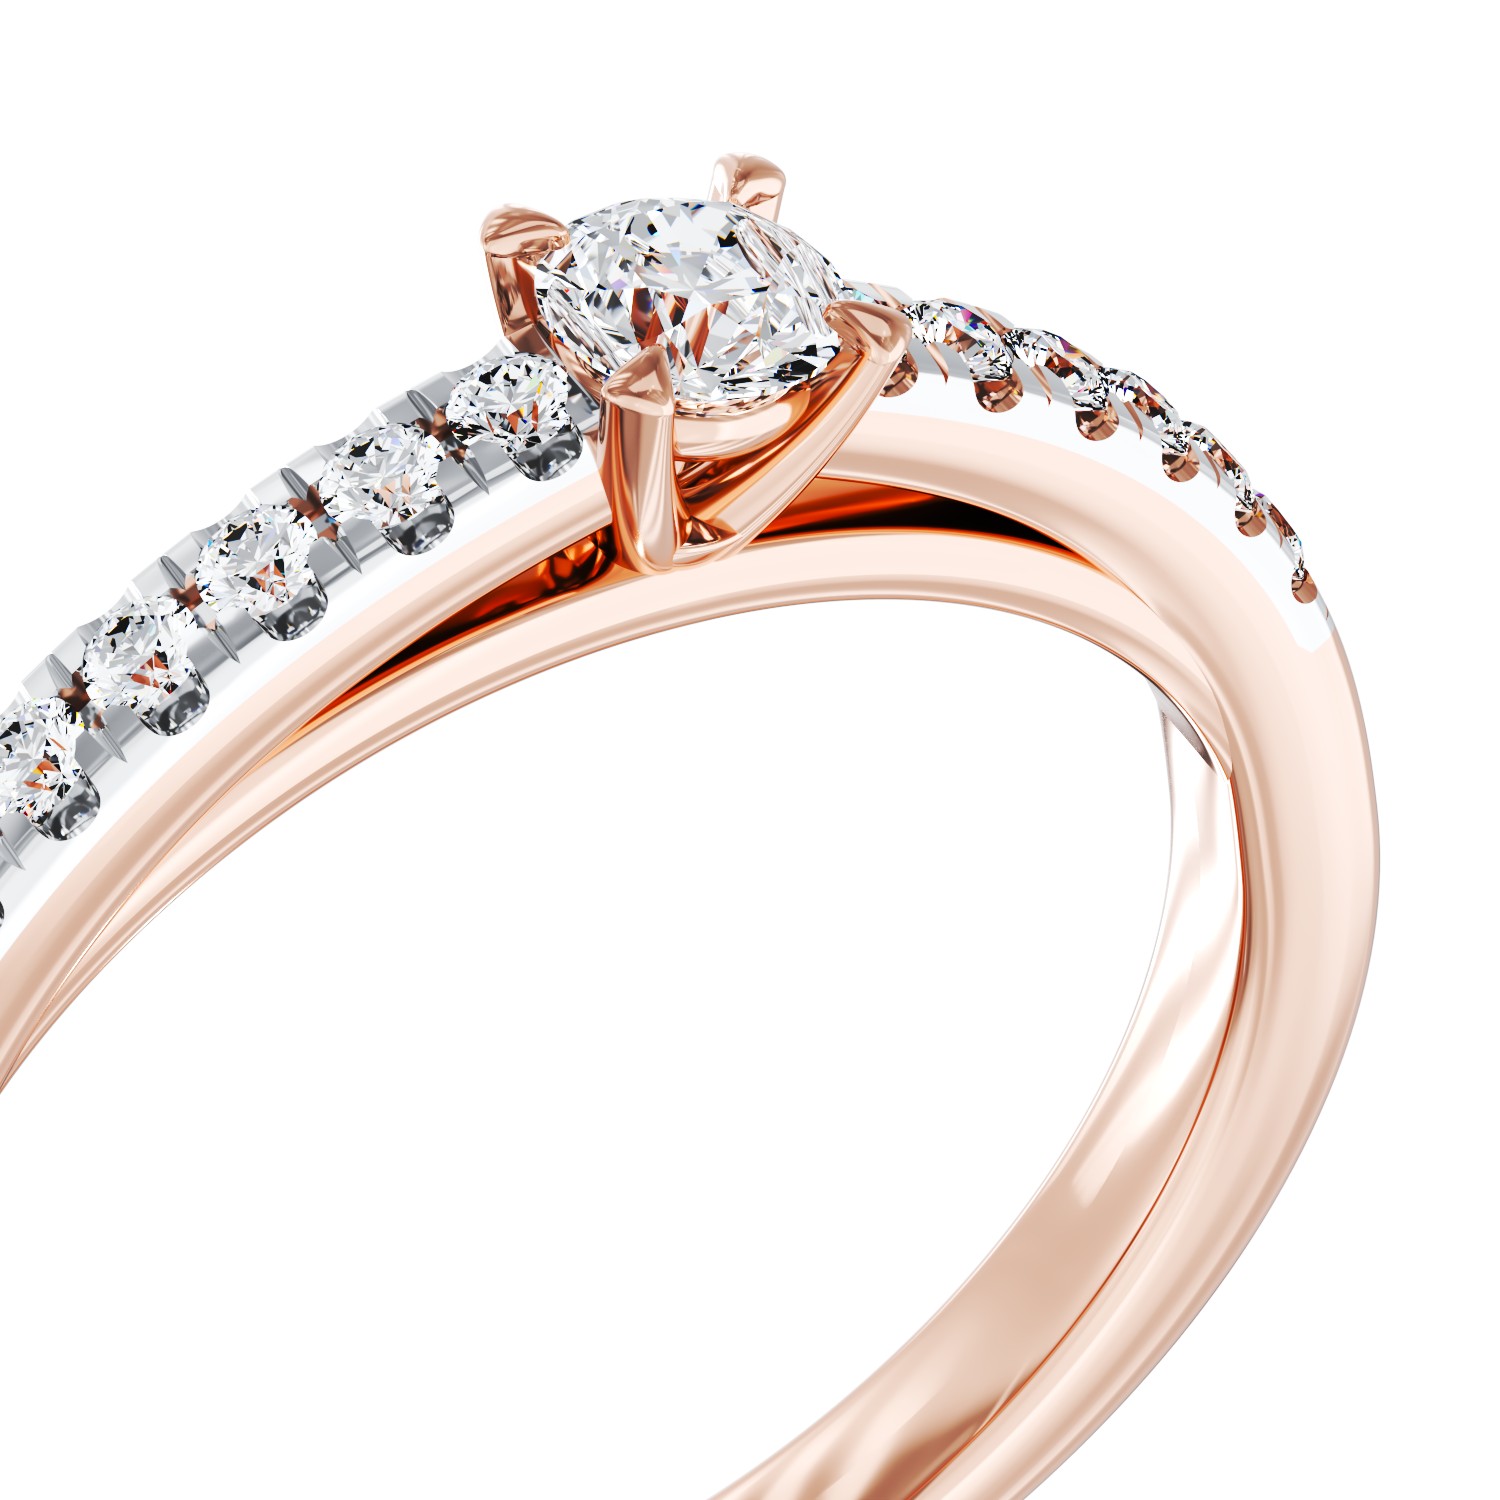 18K rose gold engagement ring with 0.28ct diamond and 0.12ct diamonds